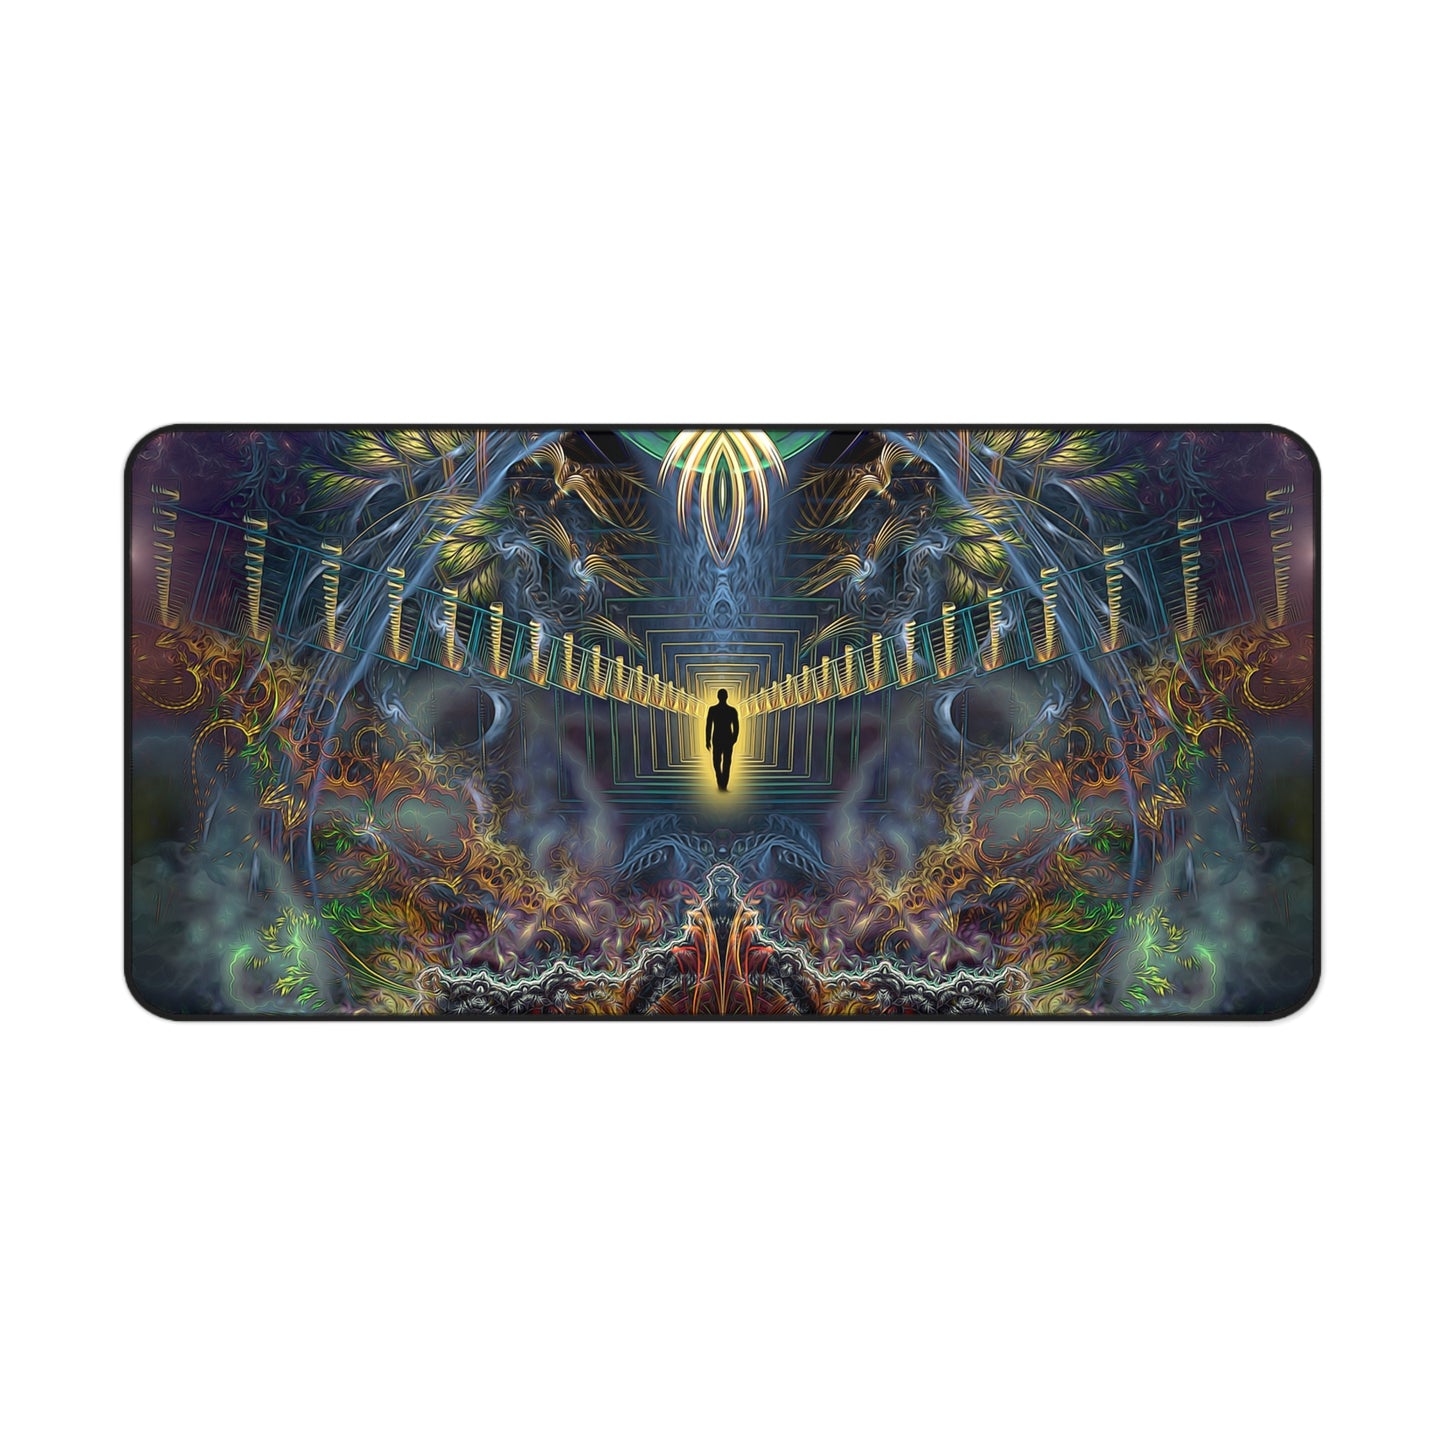 "Heightened Stroll - [Bottom Section]" DESK MAT / MOUSE PAD (12x18)(12x22)(15.5x31)